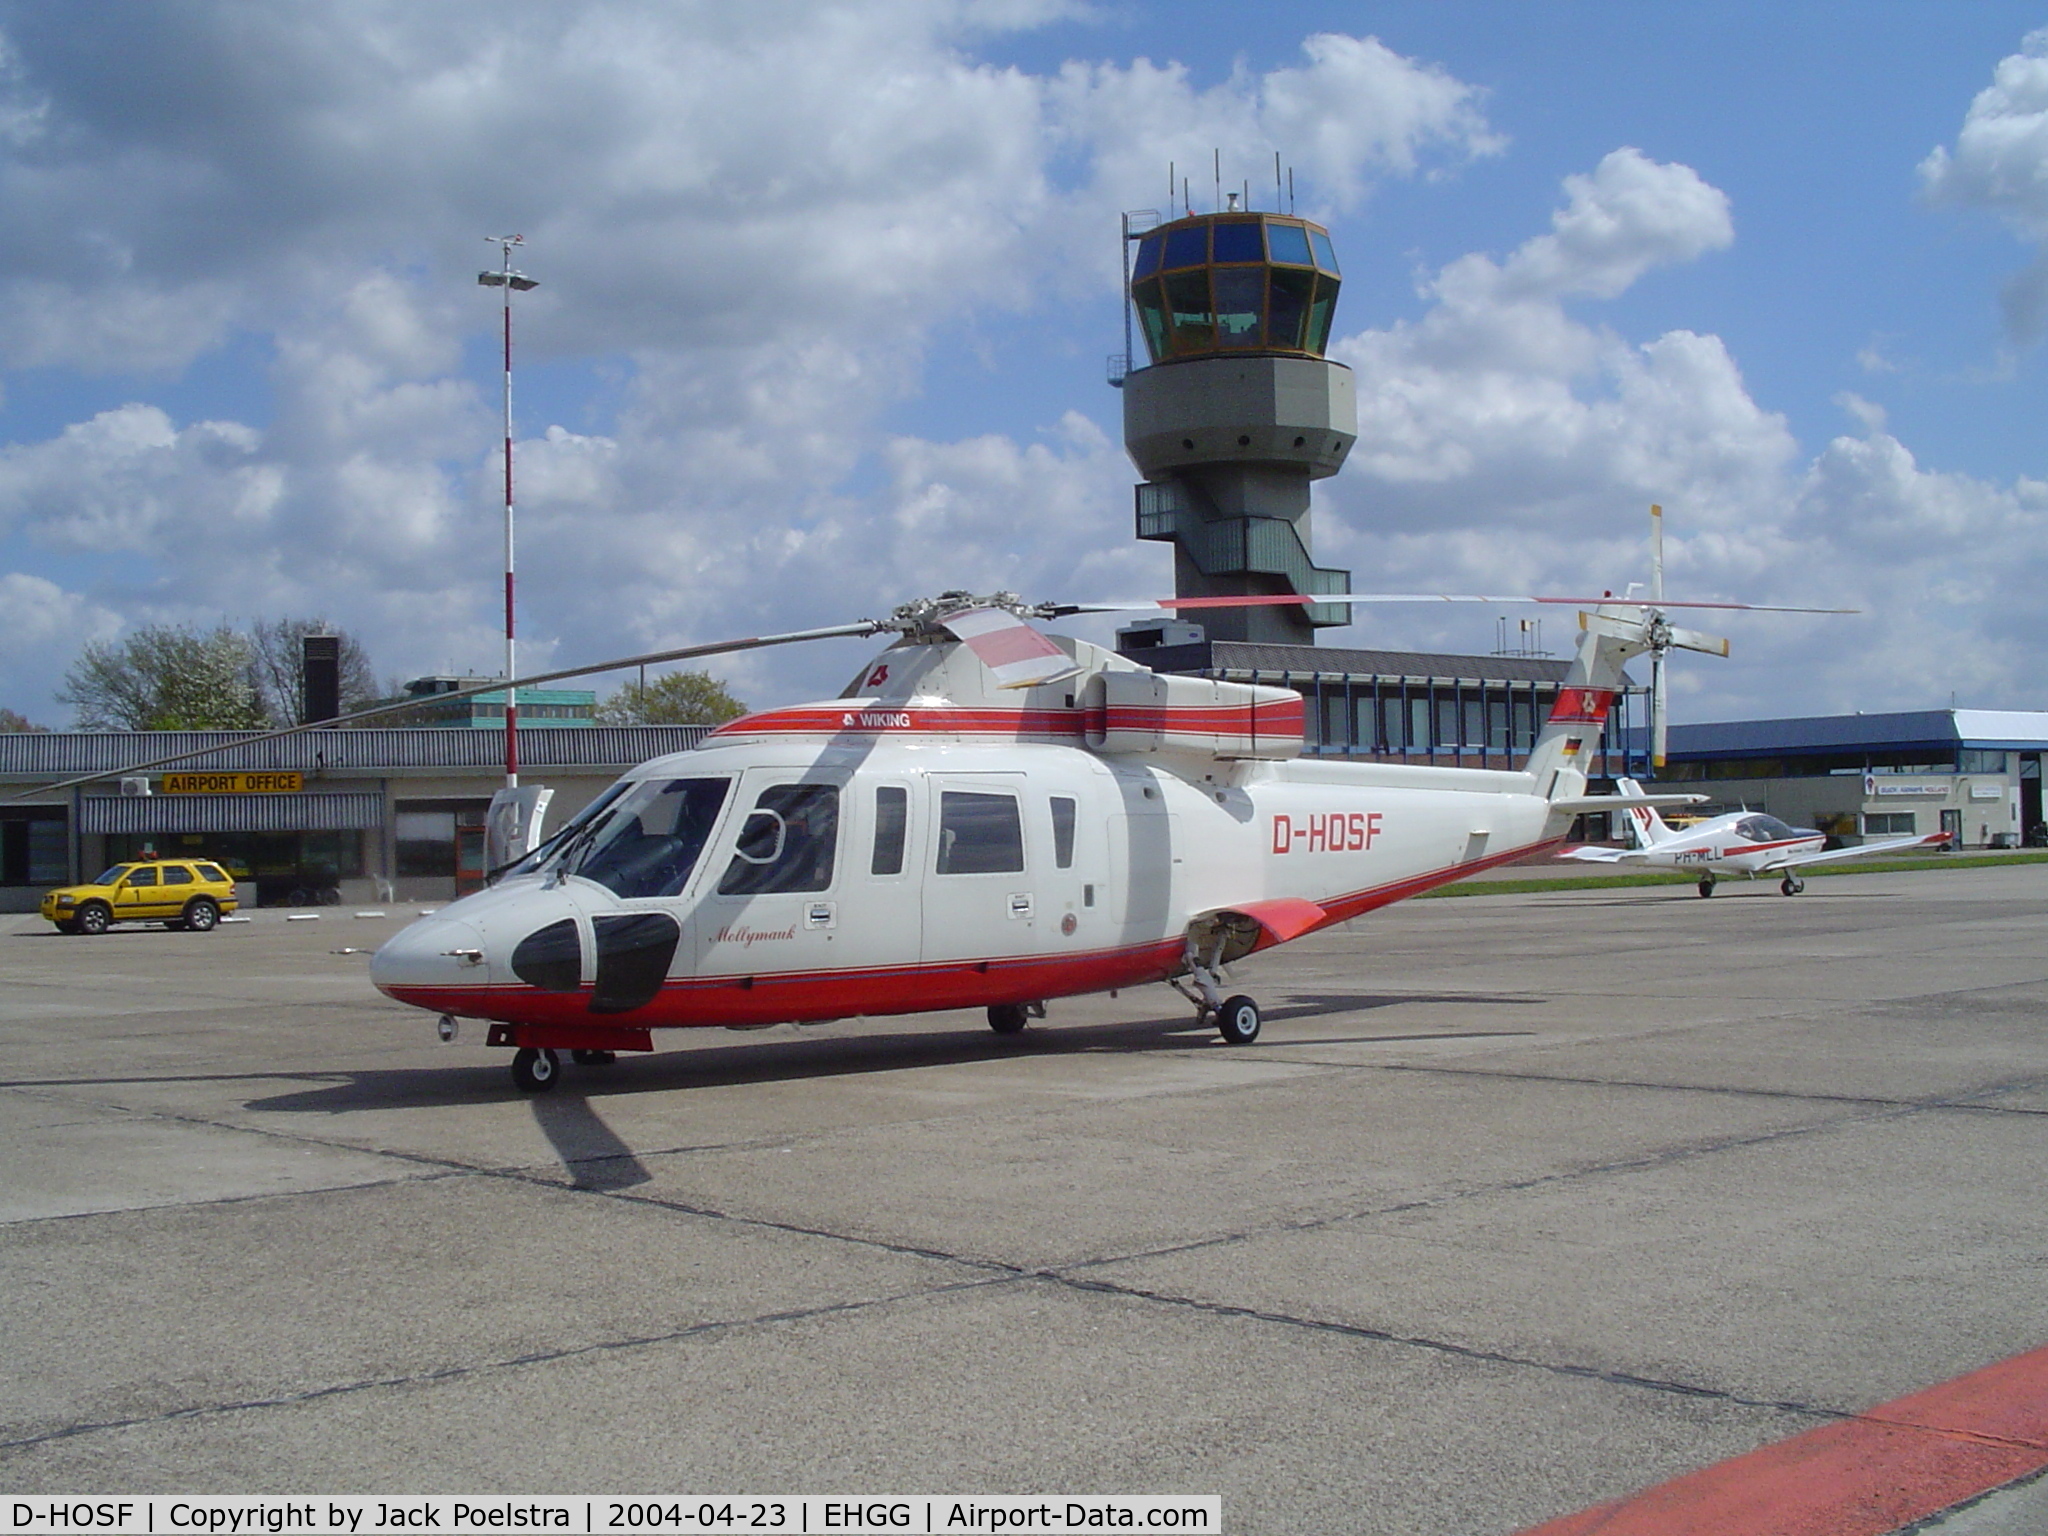 D-HOSF, Sikorsky S-76B C/N 760413, S-76B Wiking helicopters at Groningen airport